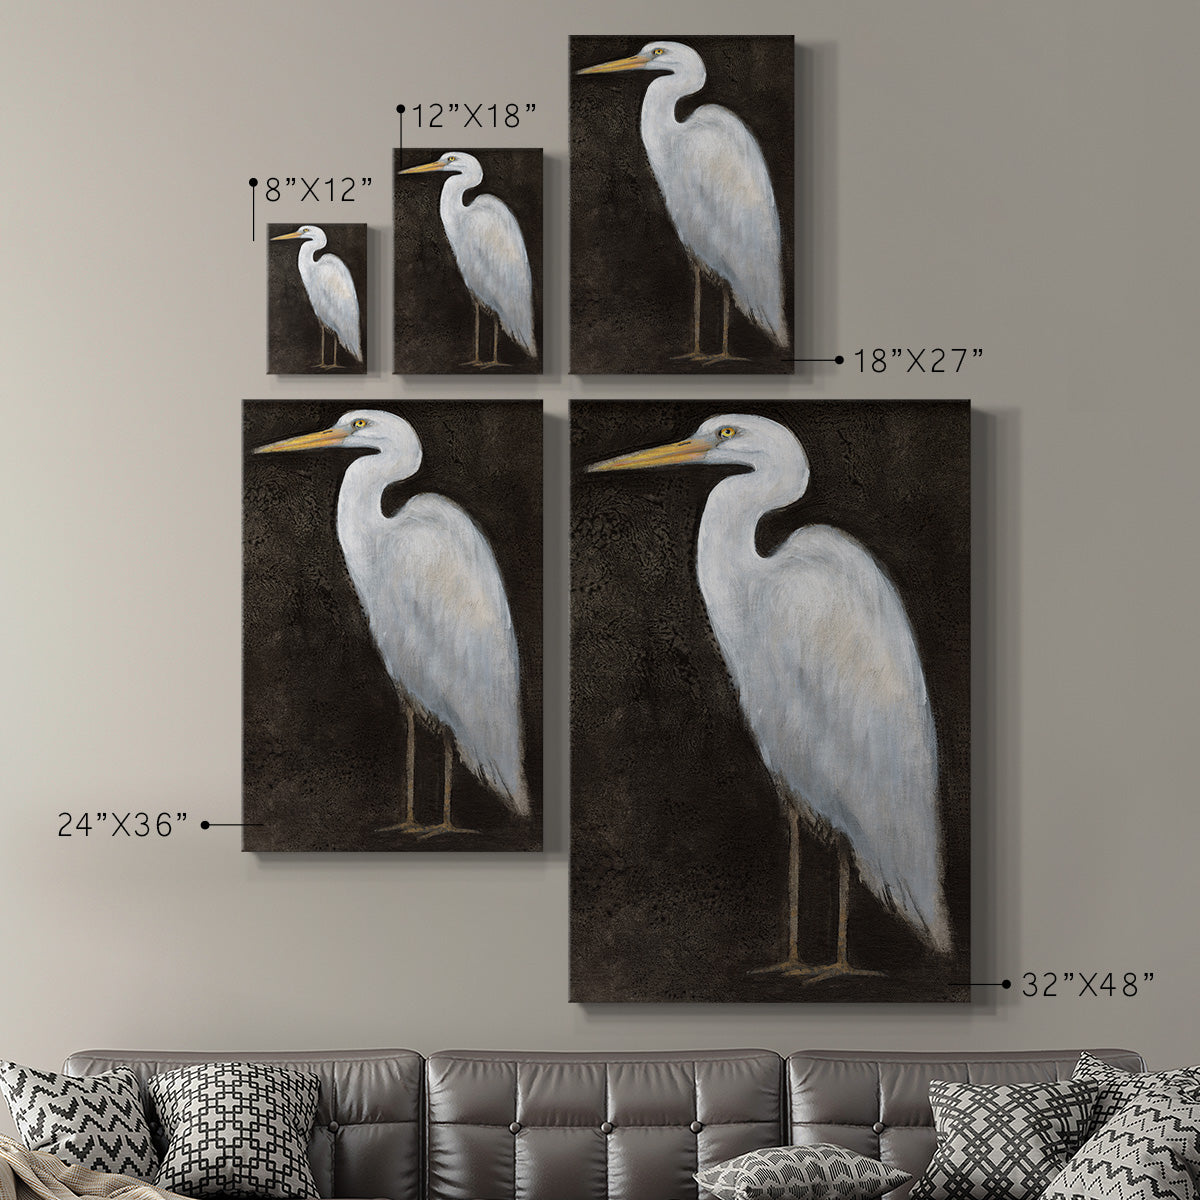 White Heron Portrait II  Premium Gallery Wrapped Canvas - Ready to Hang